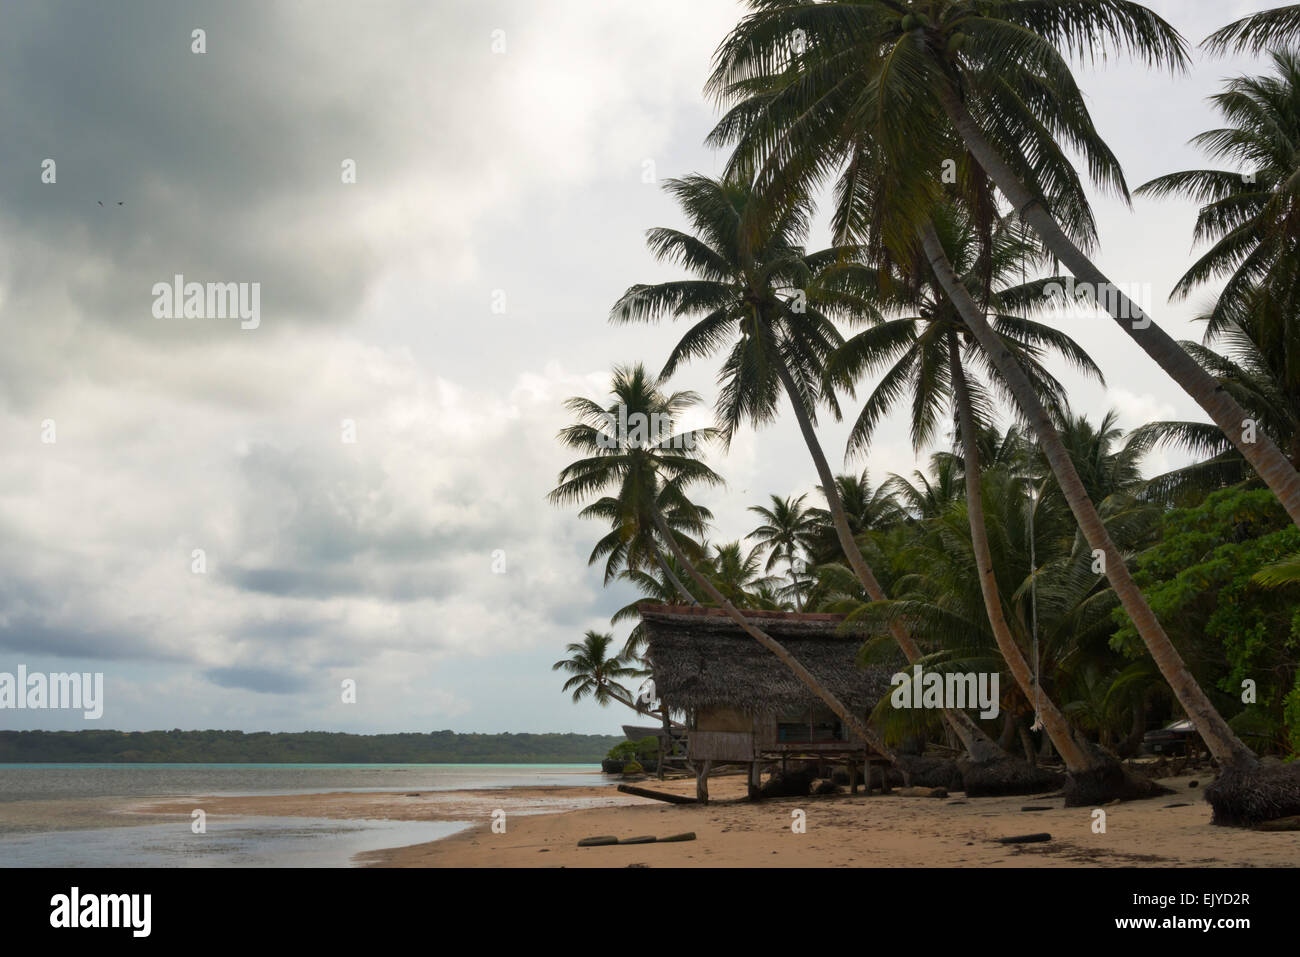 Men's house and palm trees on the beach, Yap Island, Federated States ...